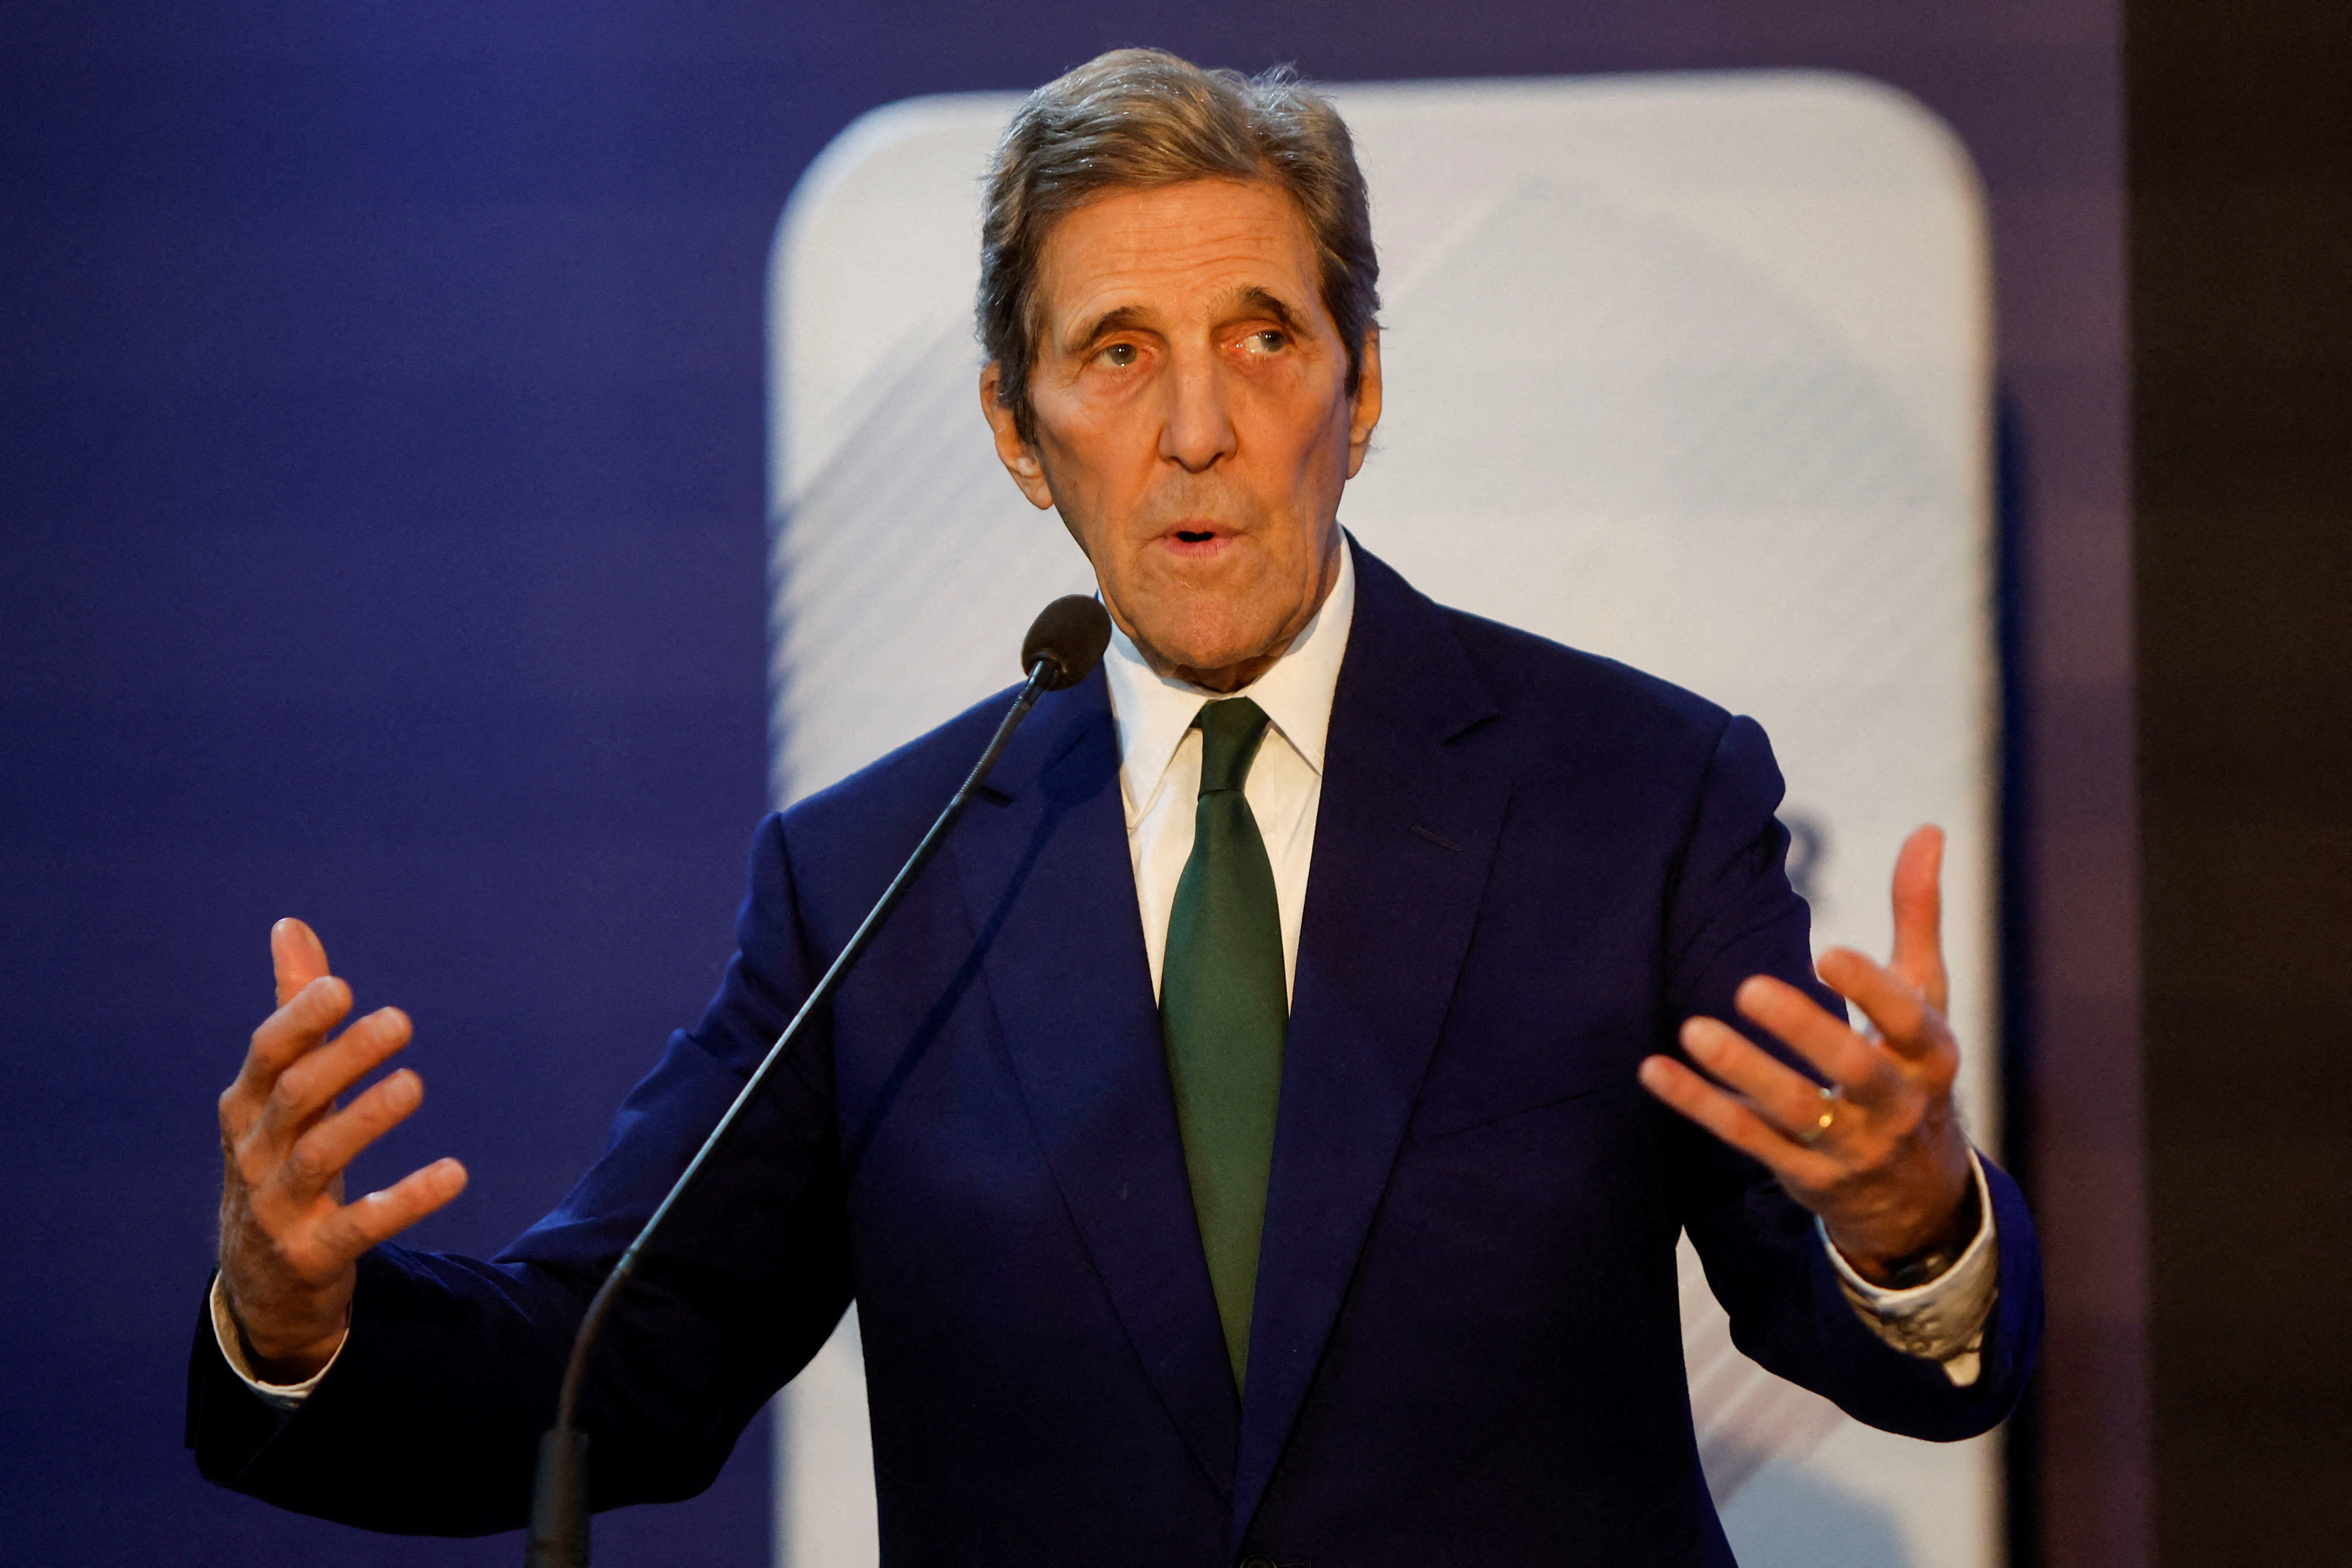 John Kerry, U.S. Special Envoy for Climate